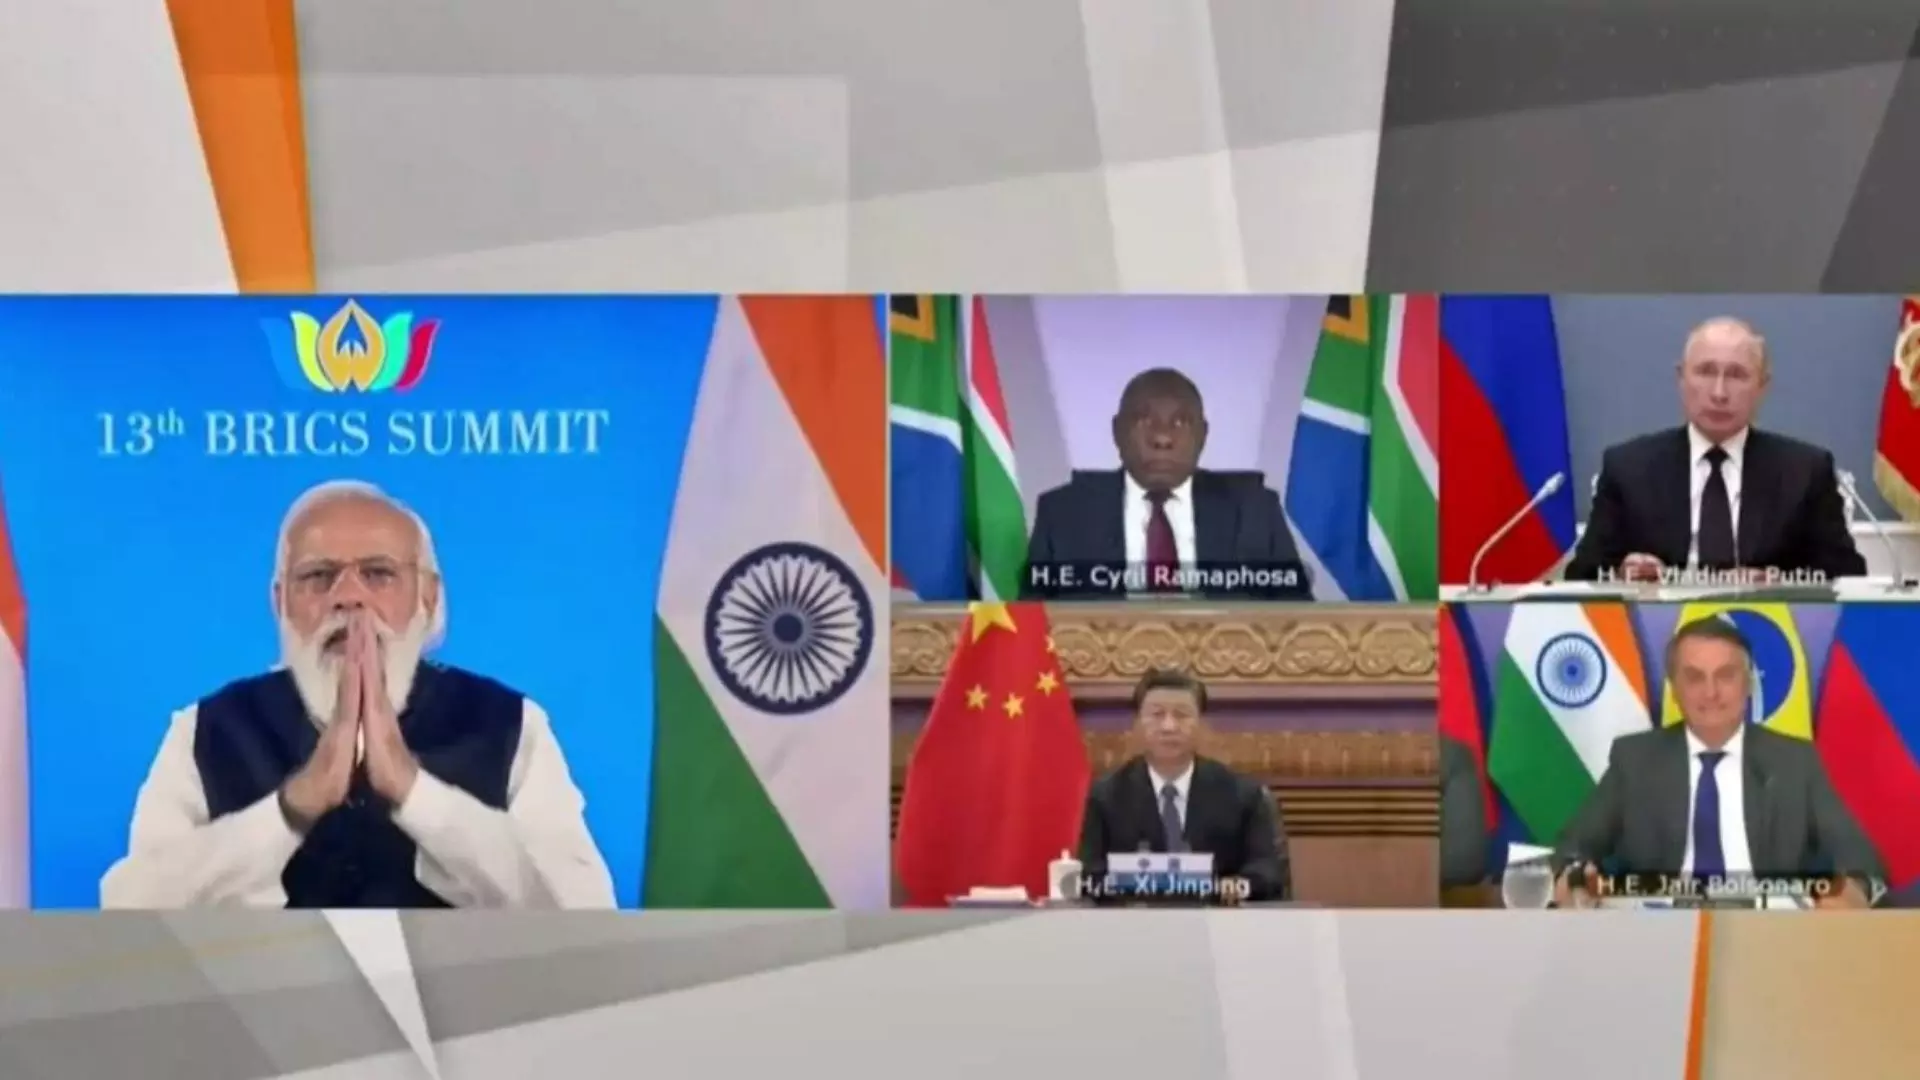 Conference of BRICS Countries Chaired by Prime Minister Modi